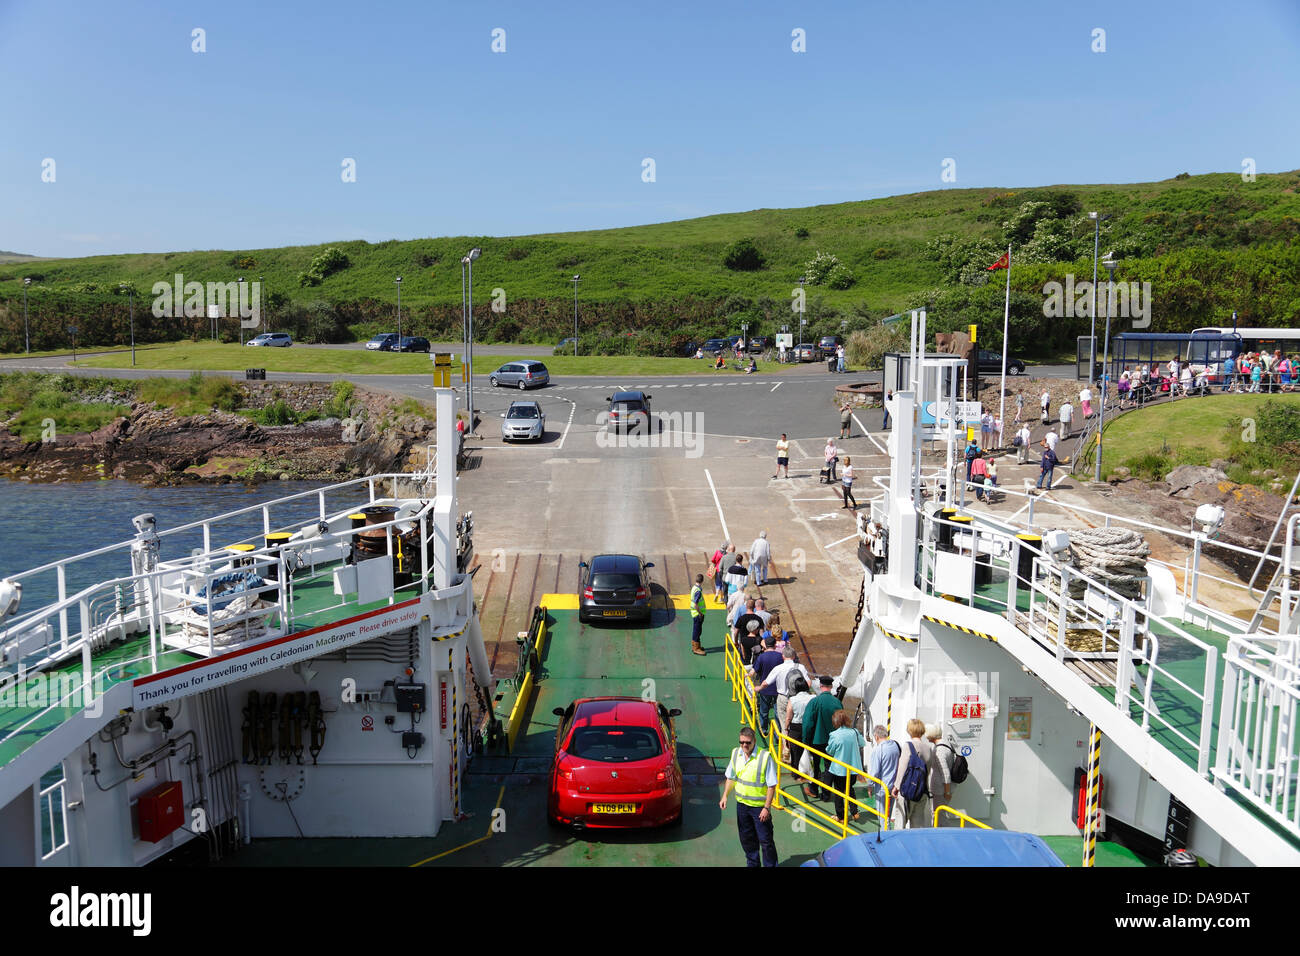 Island of Great Cumbrae, North Ayrshire, Scotland, UK, Monday, 8th July, 2013. Passengers and cars disembark a Caledonian Macbrayne Ferry in warm sunshine after sailing from the town of Largs in the Firth of Clyde Stock Photo